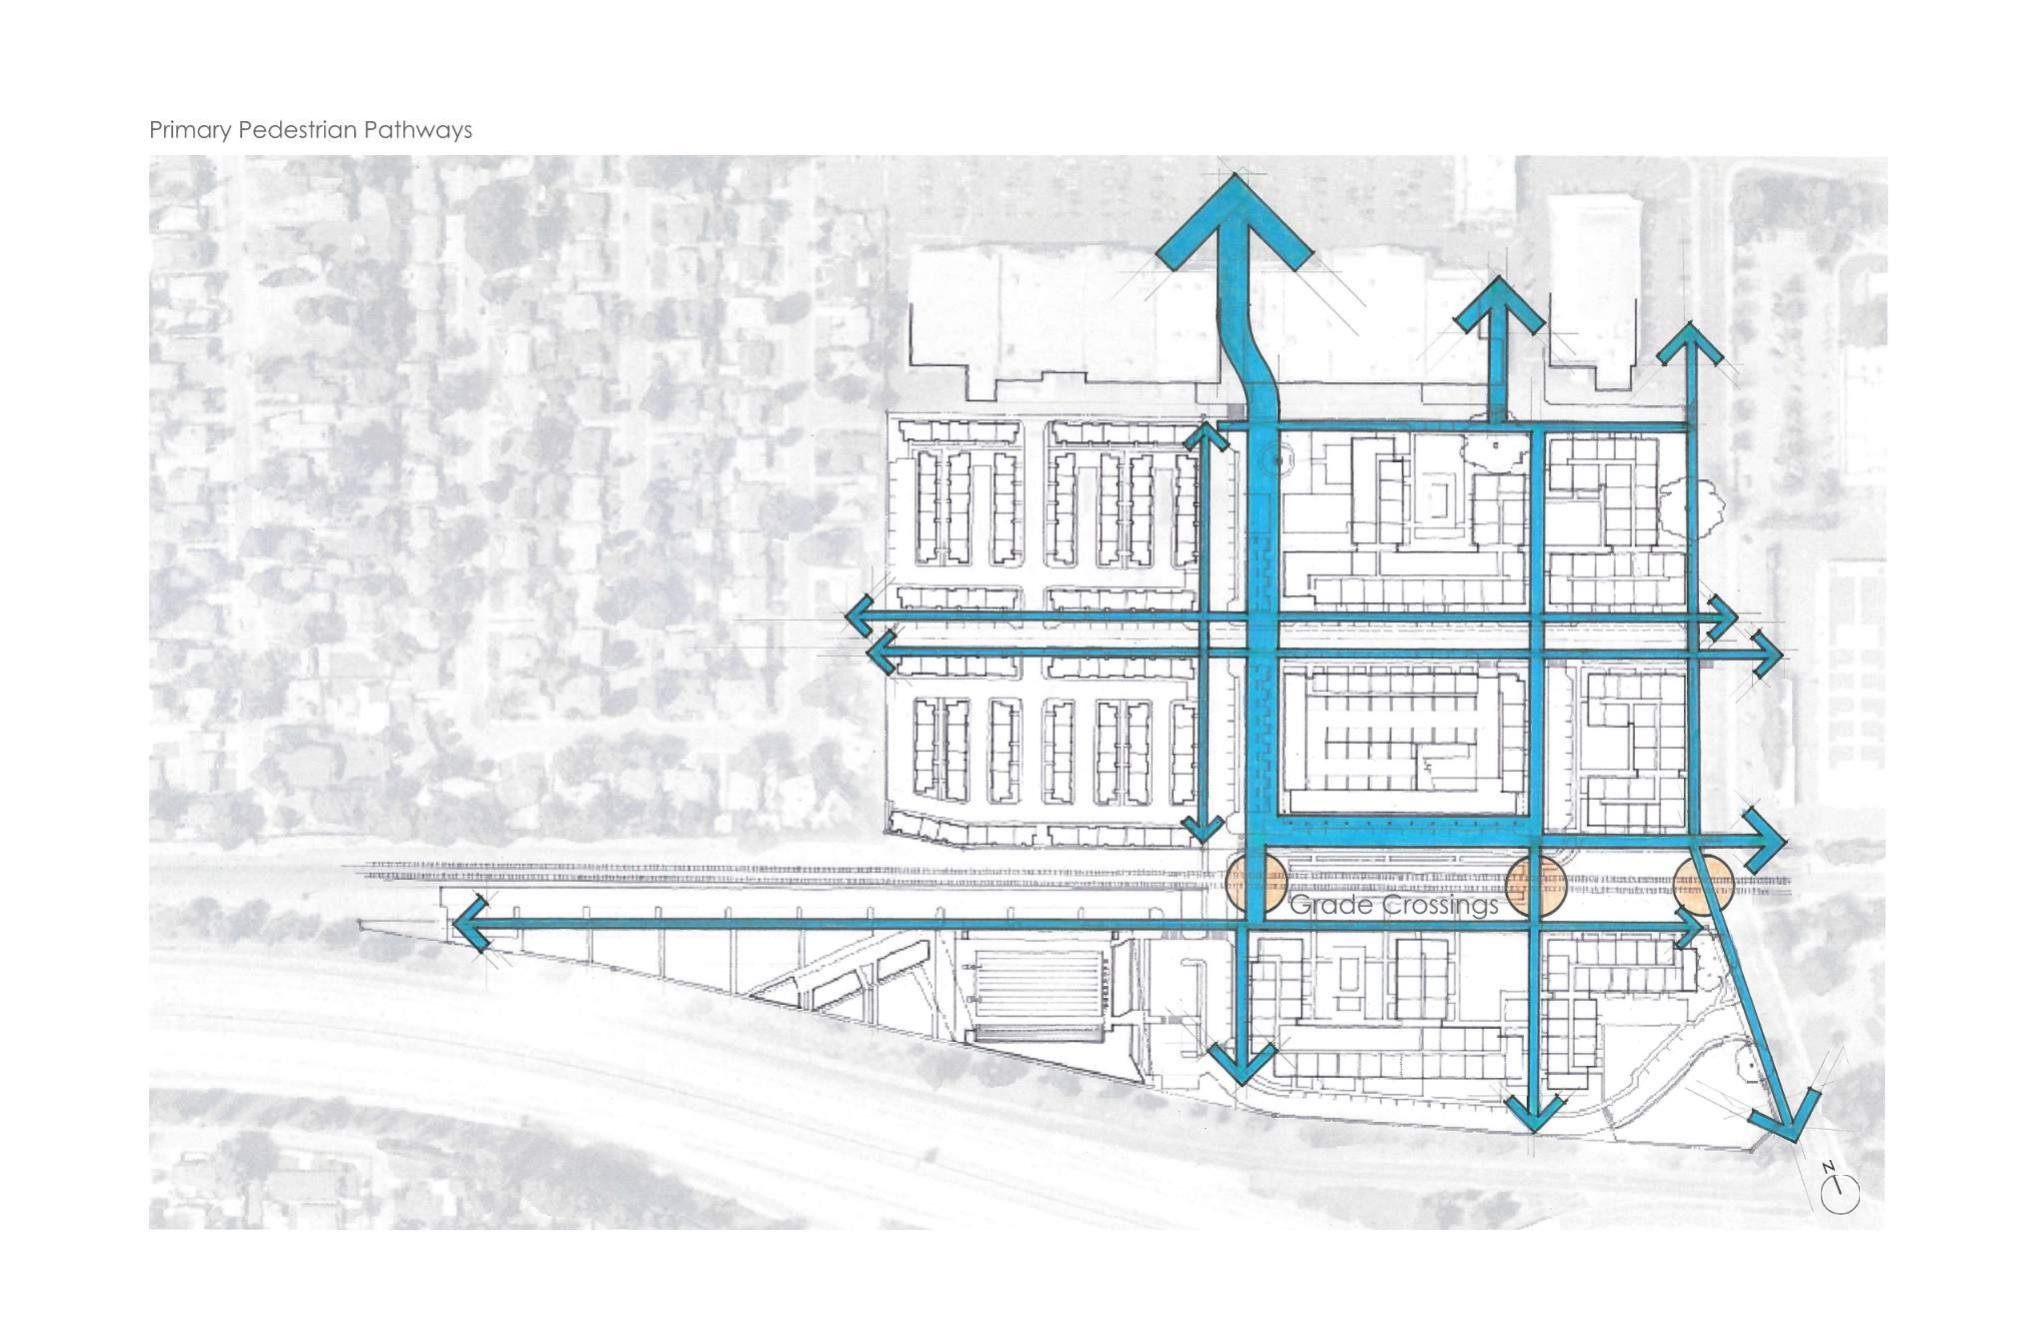 59th St SMUD -  - SMUD Diagrams Drafts Page 008.jpg